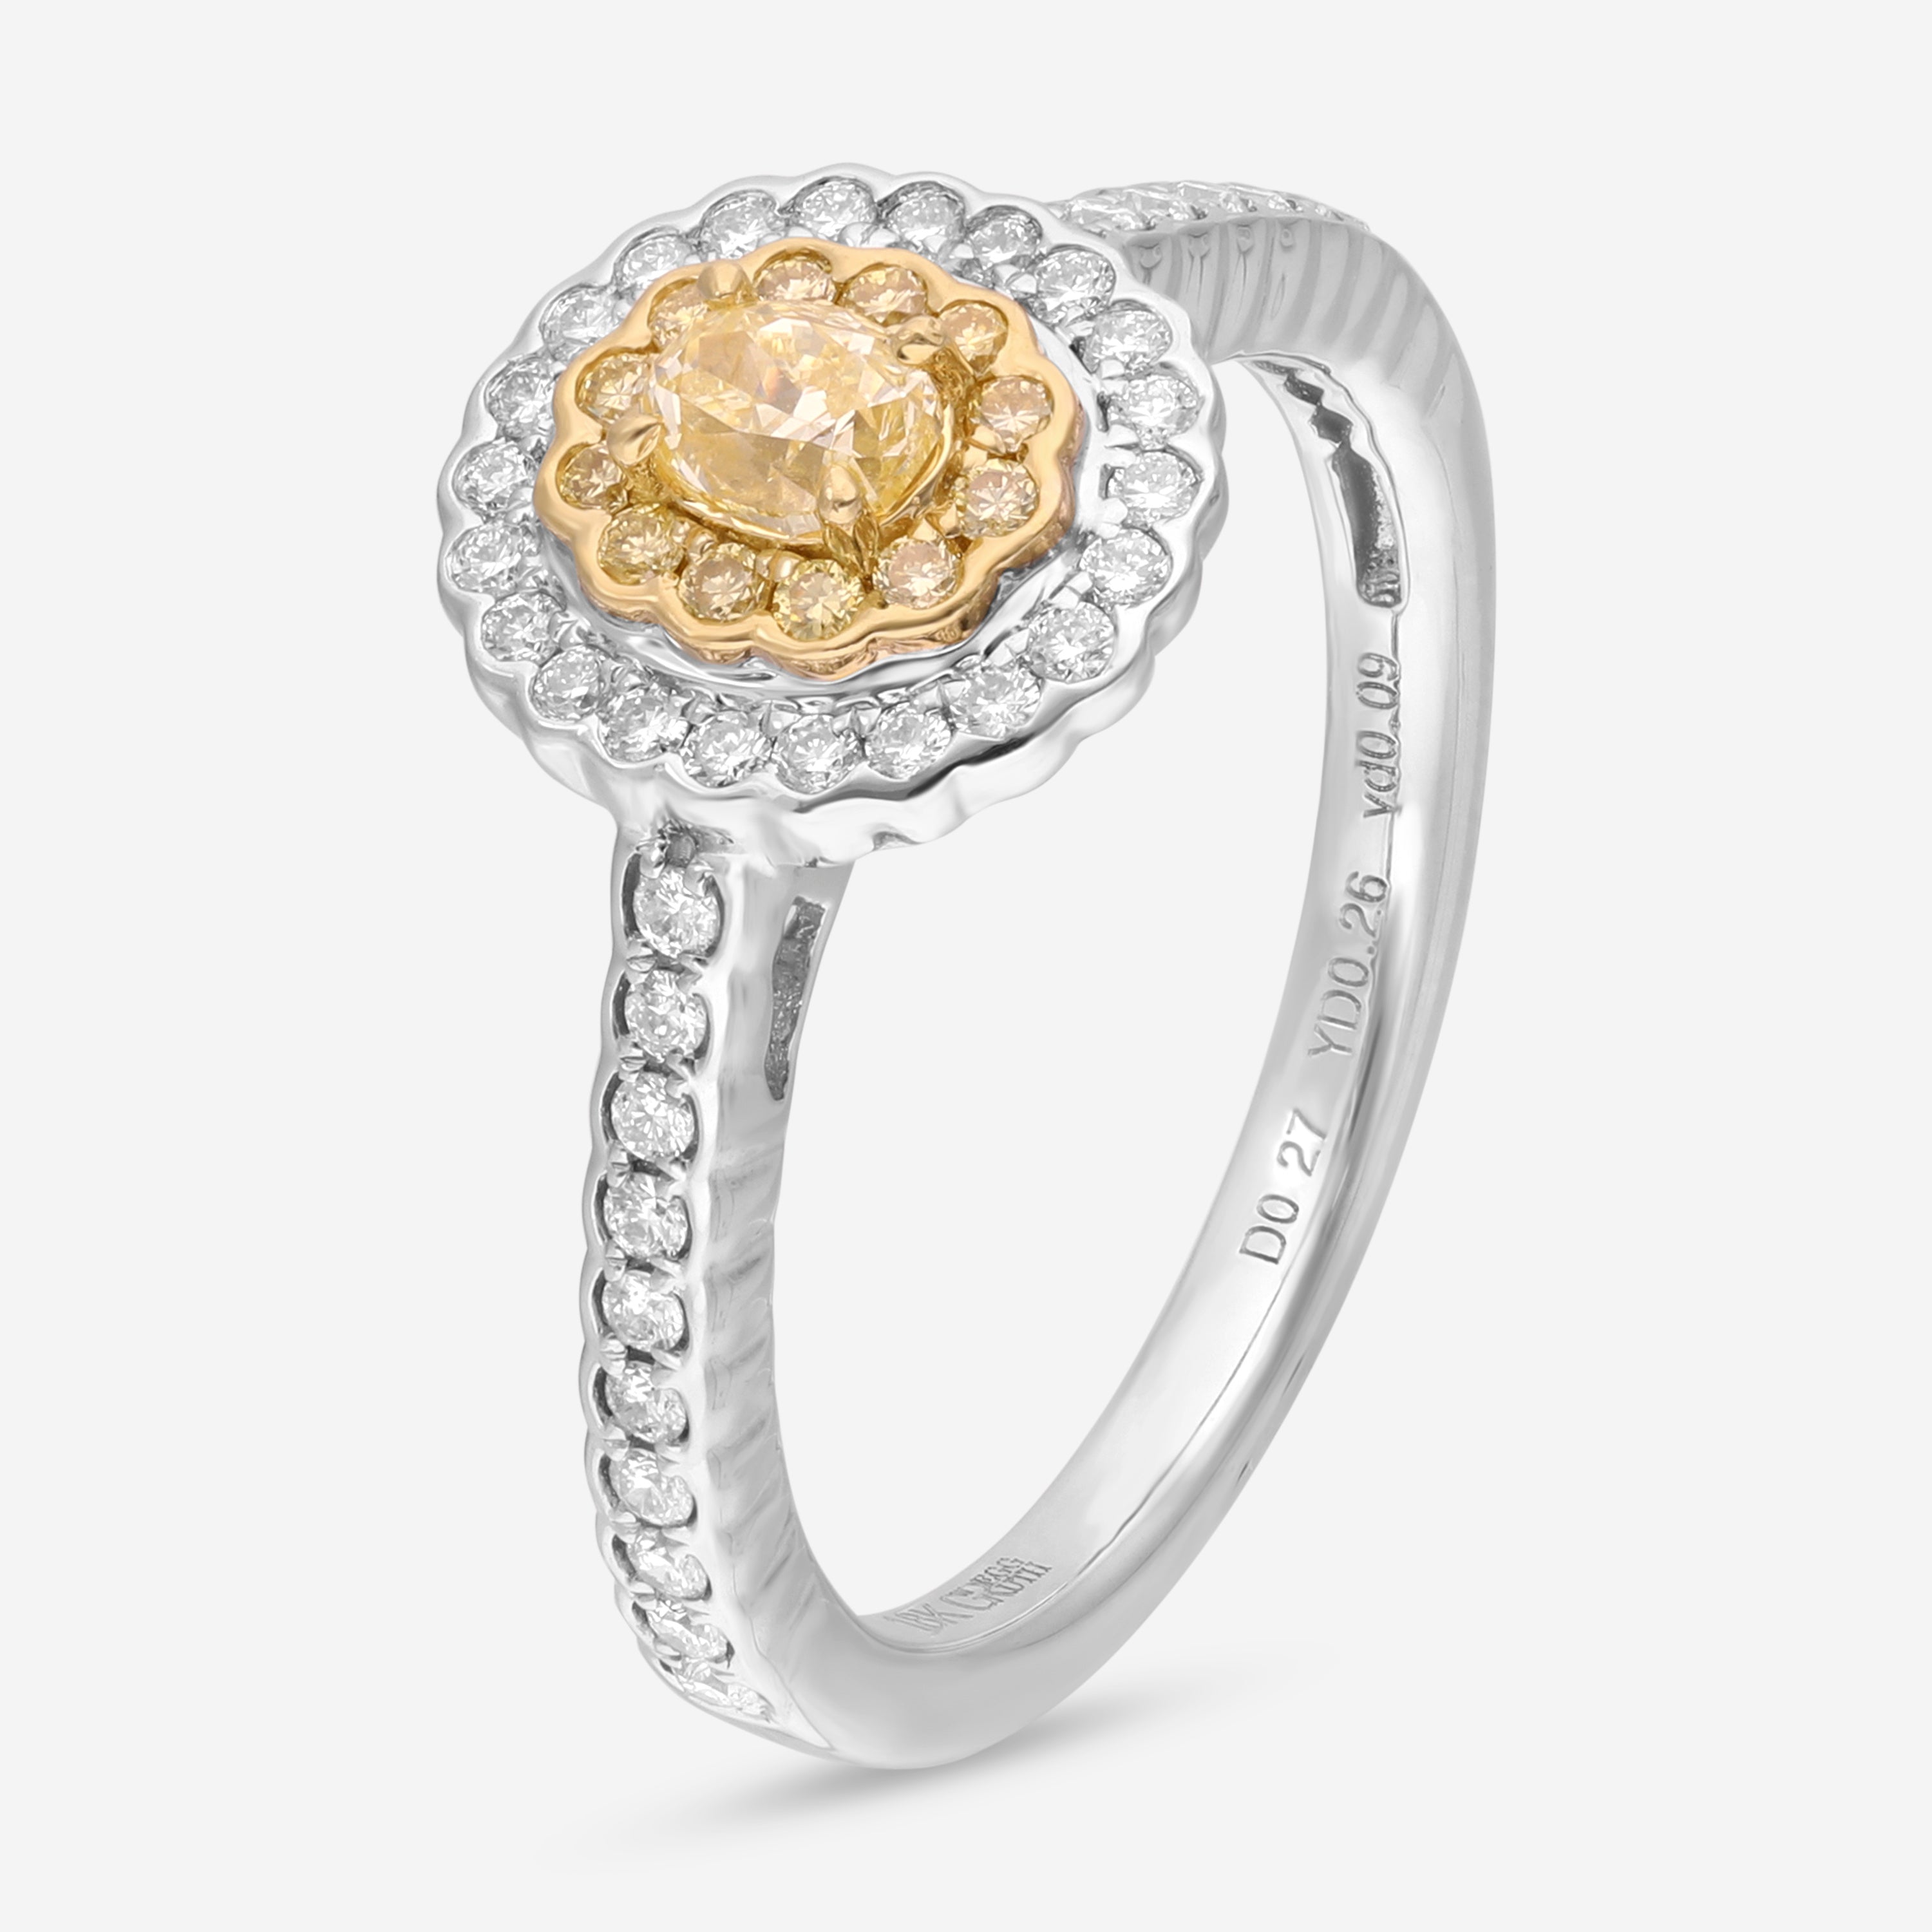 Gregg Ruth 18K Gold, Fancy Yellow Diamond 0.25ct. and White Diamond 0.27ct. tw. Engagement Ring Sz. 6.75 59367 - THE SOLIST